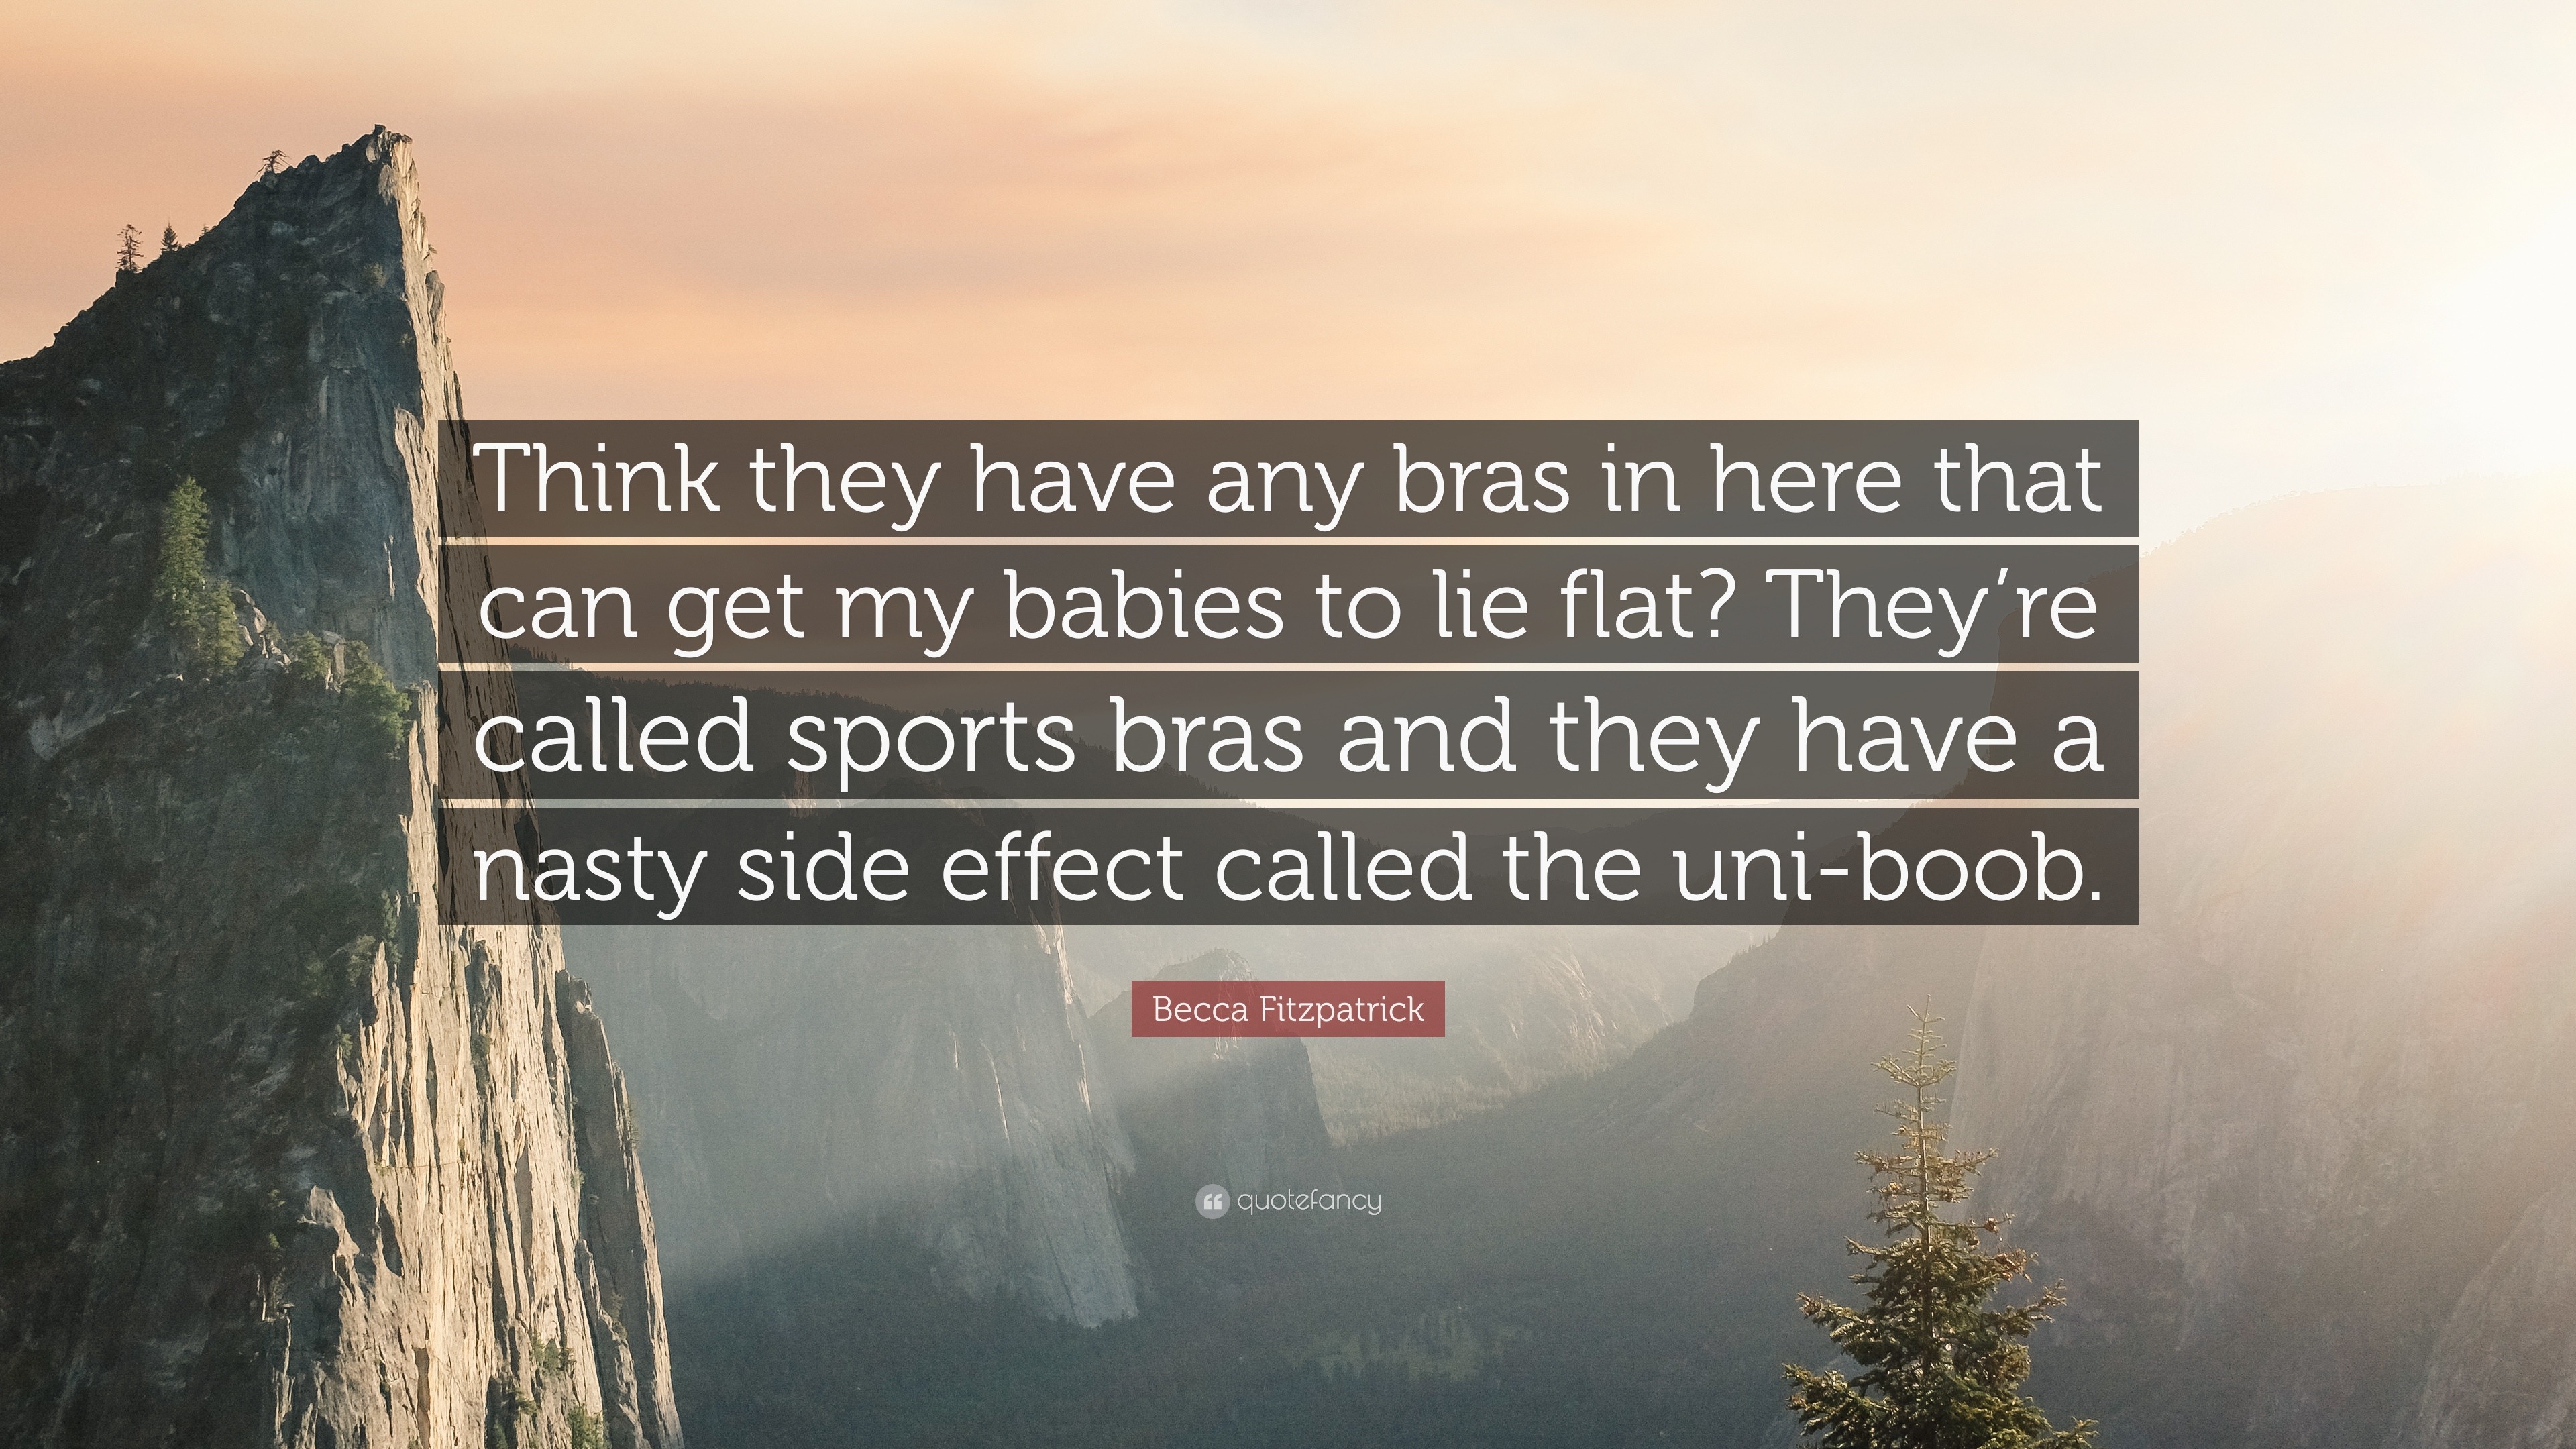 Becca Fitzpatrick Quote: “Think they have any bras in here that can get my  babies to lie flat? They're called sports bras and they have a nasty si”